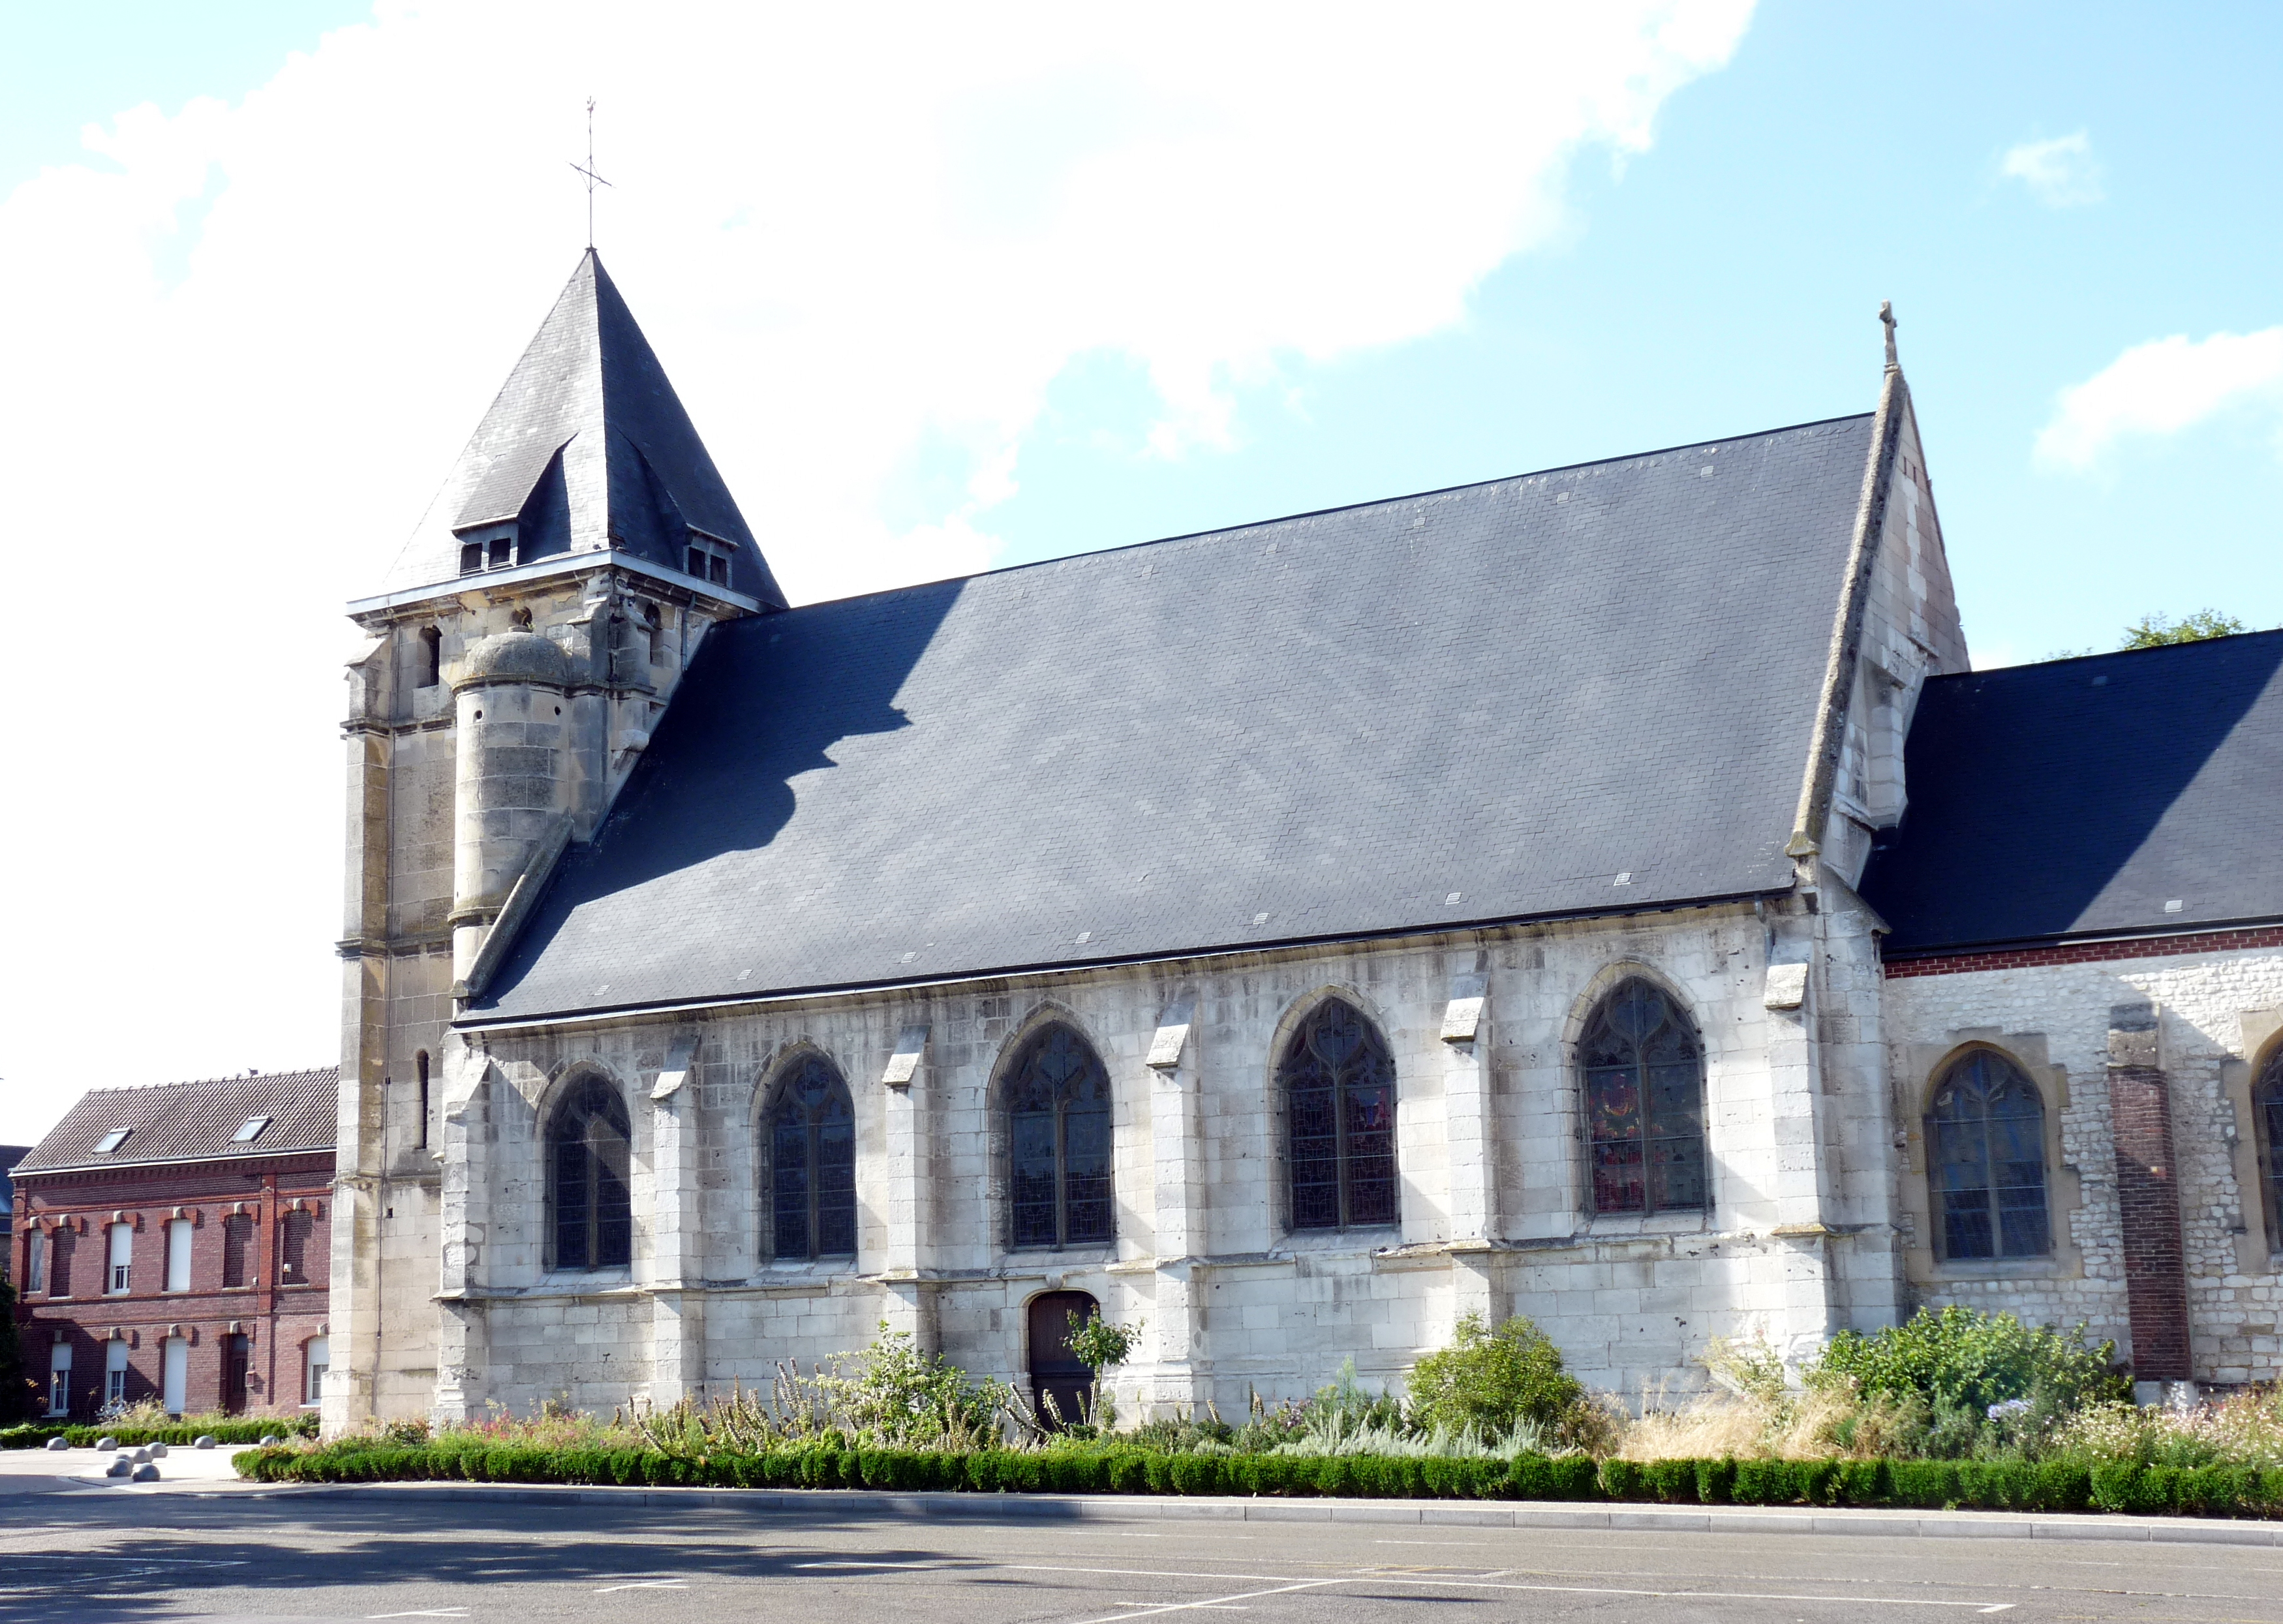 The church in Saint Etienne du Rouvray, France